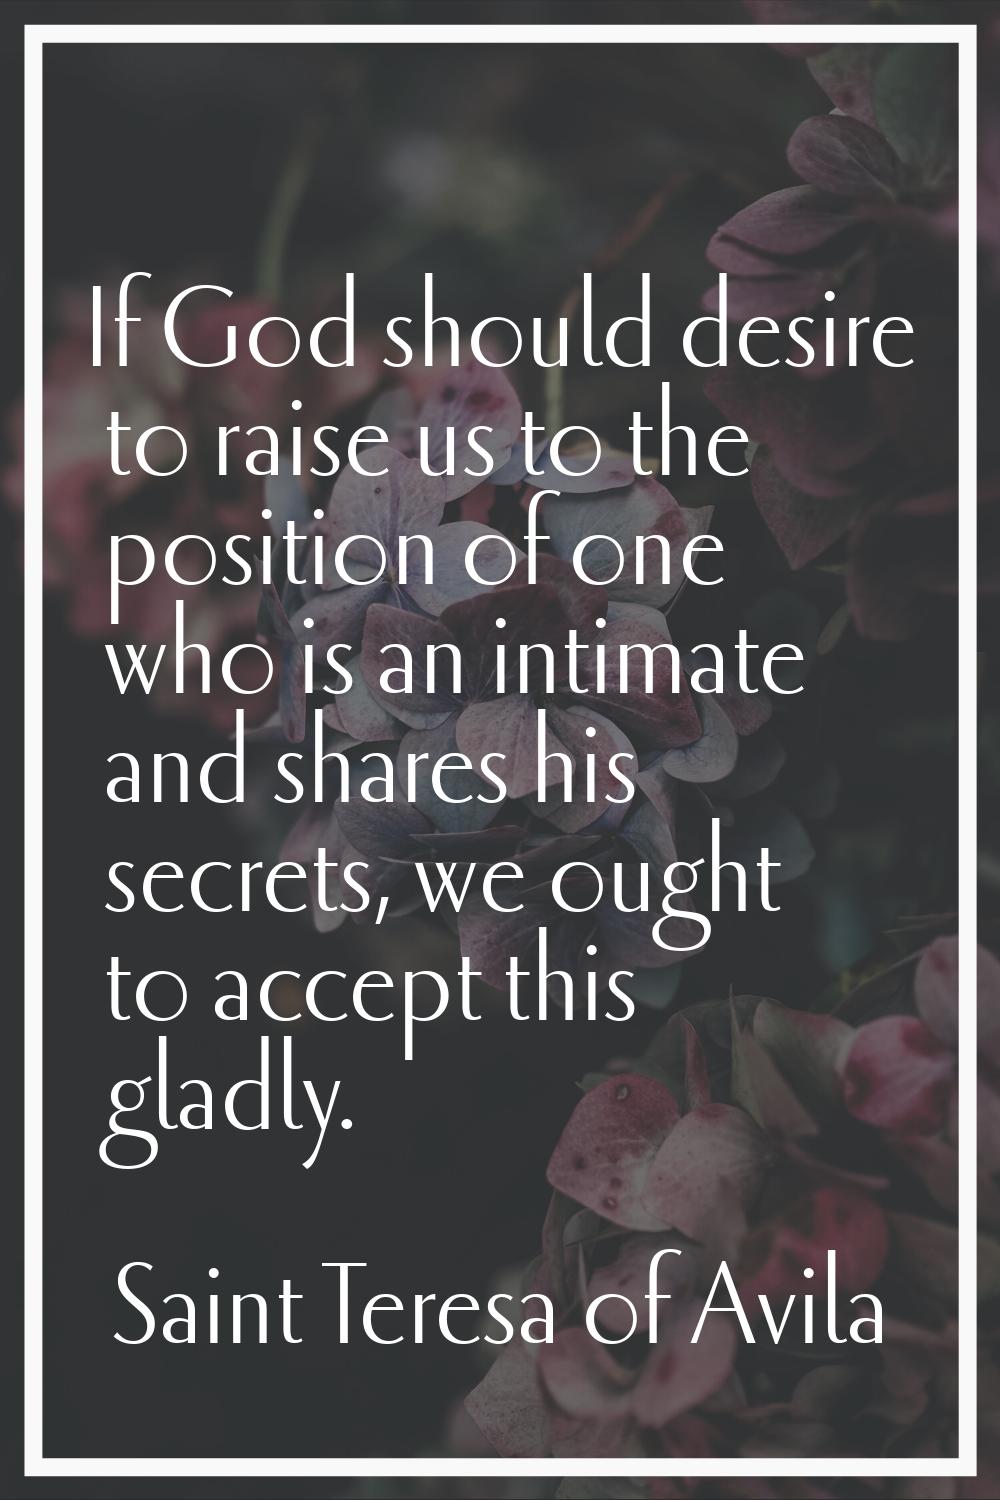 If God should desire to raise us to the position of one who is an intimate and shares his secrets, 